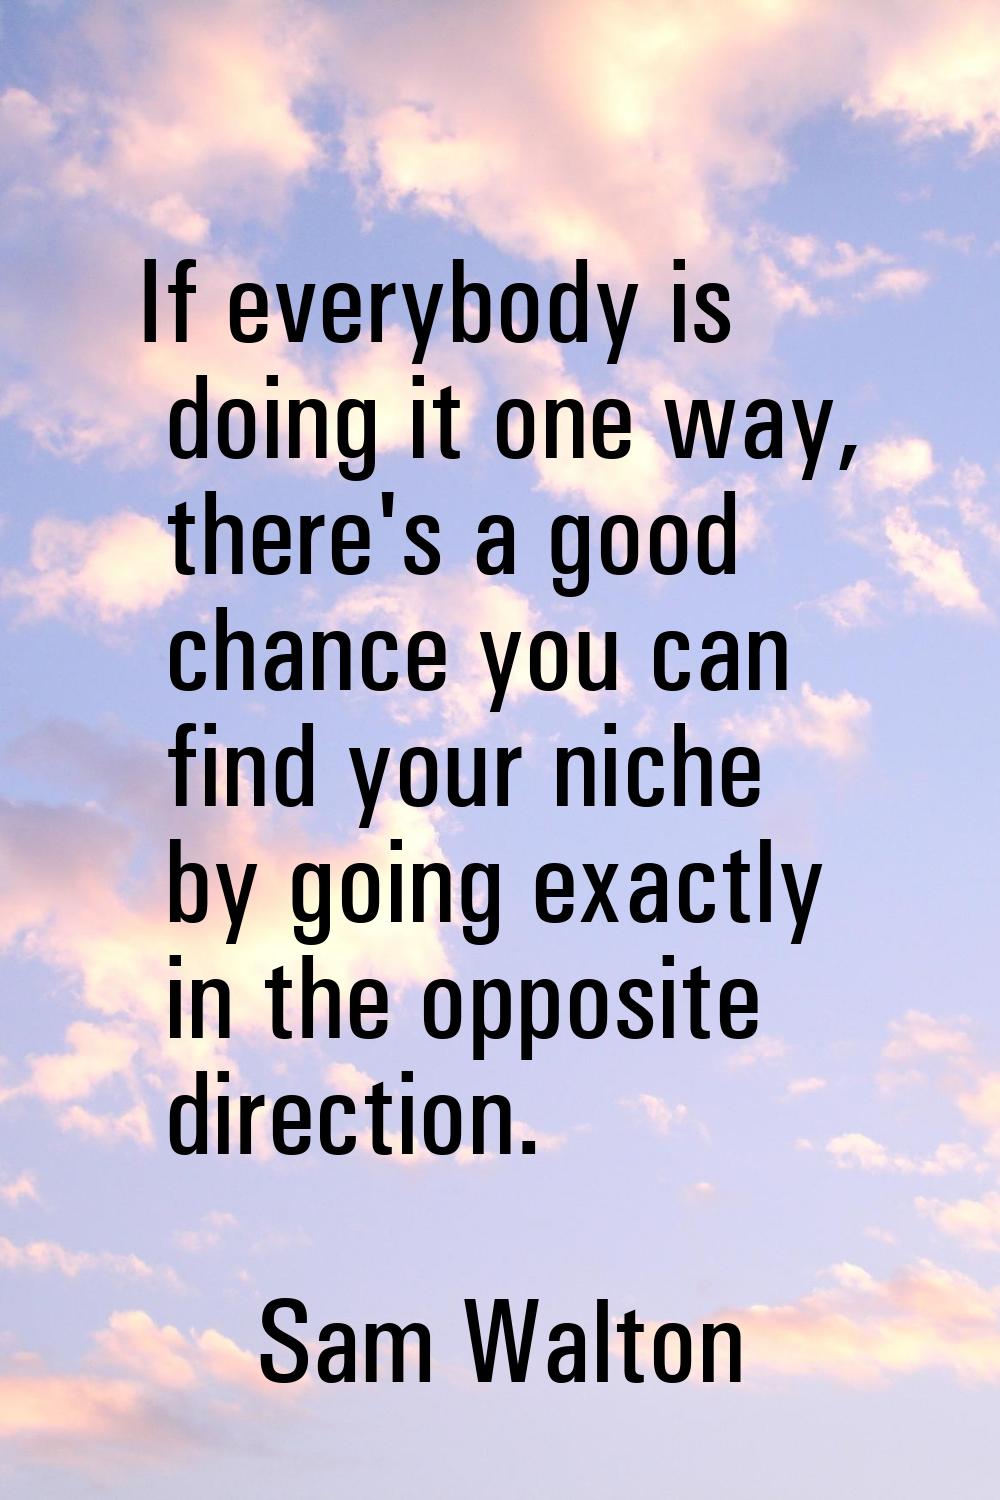 If everybody is doing it one way, there's a good chance you can find your niche by going exactly in